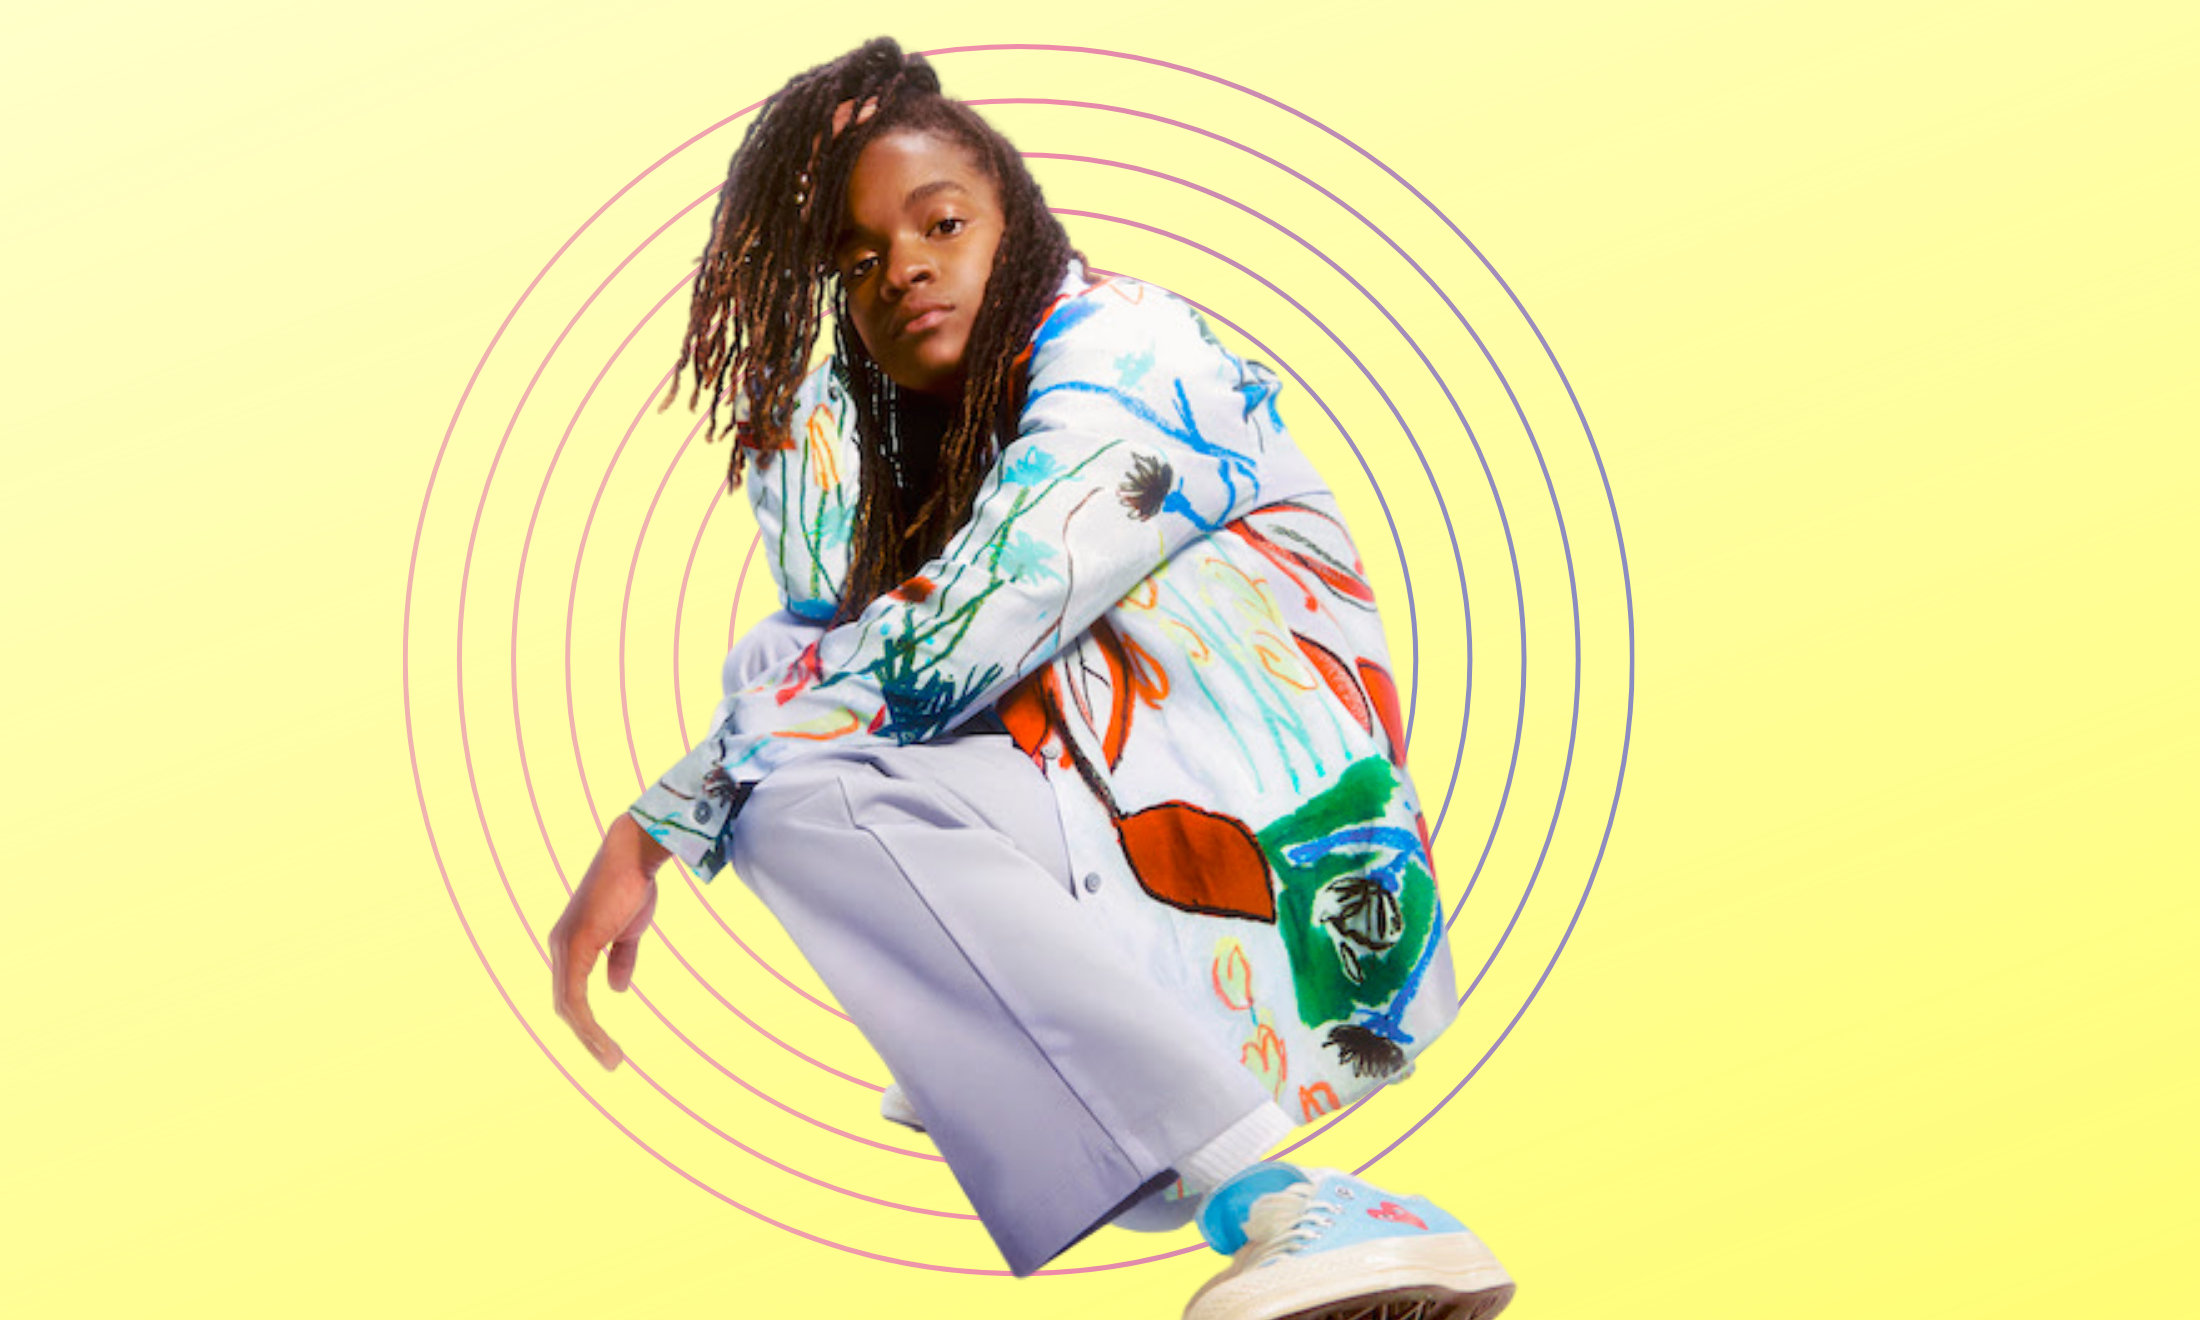 ‘Life is truly a gift’: Koffee on growth, gratitude and her shining debut album